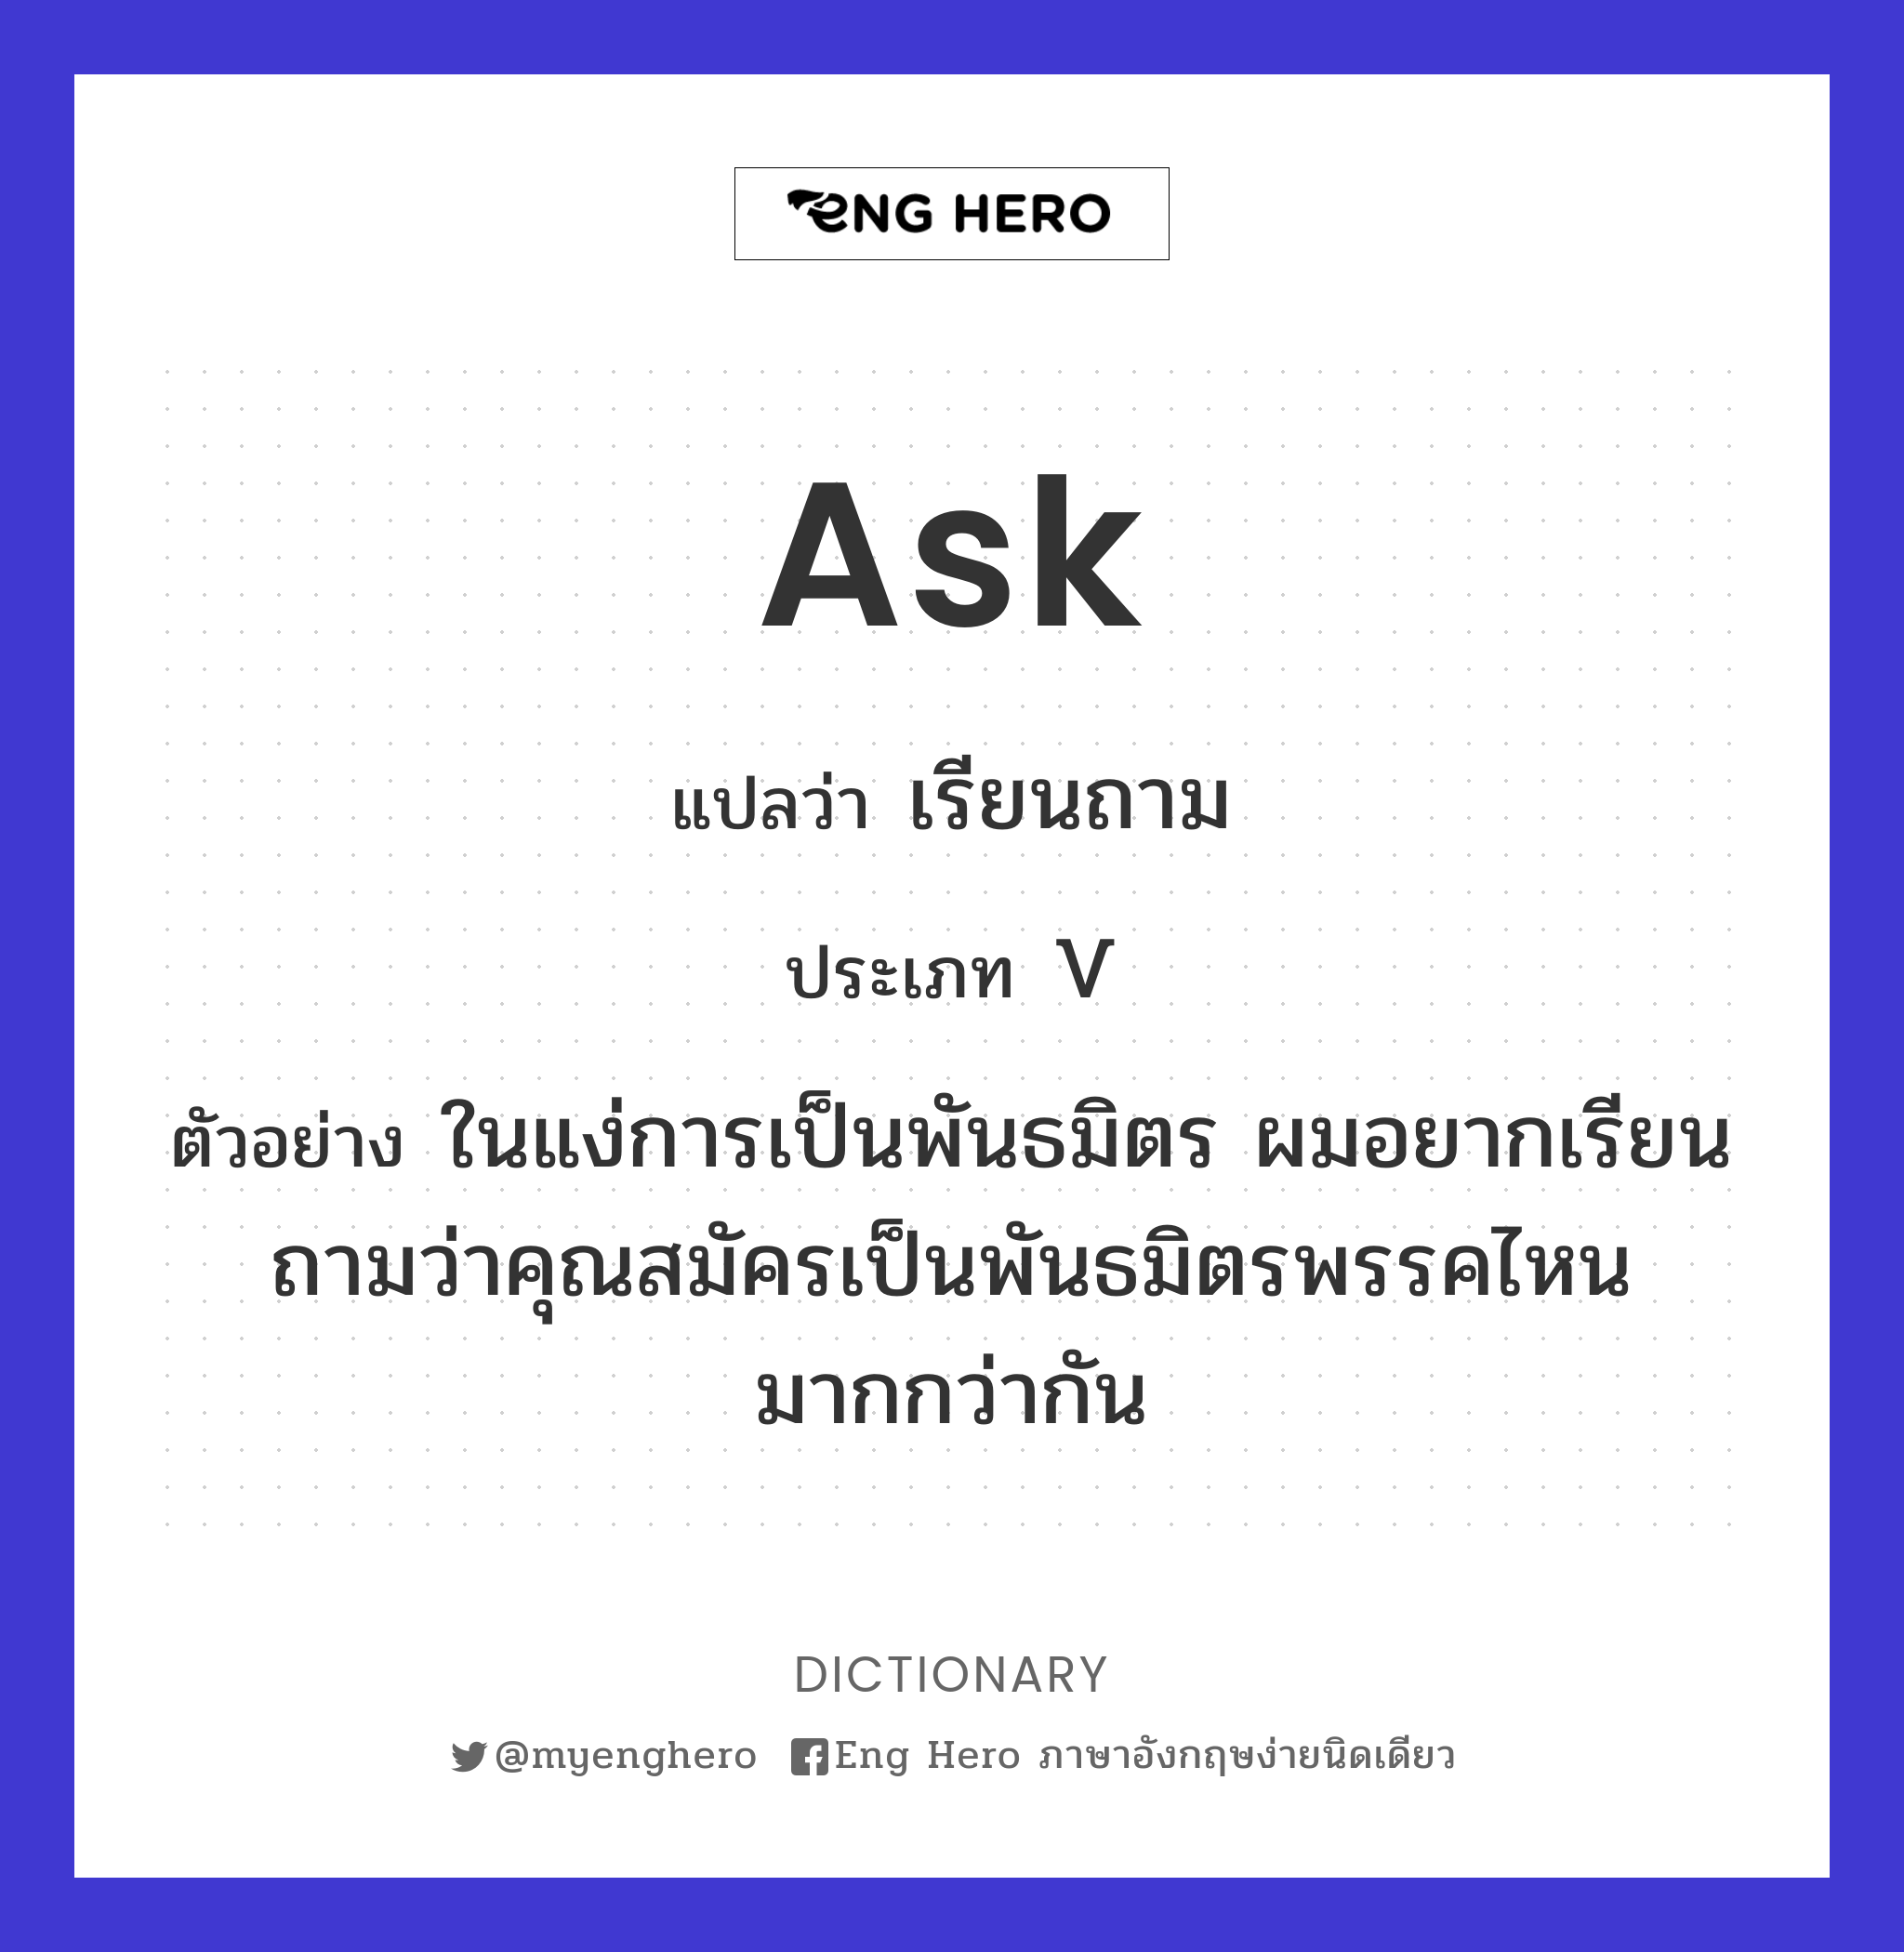 ask